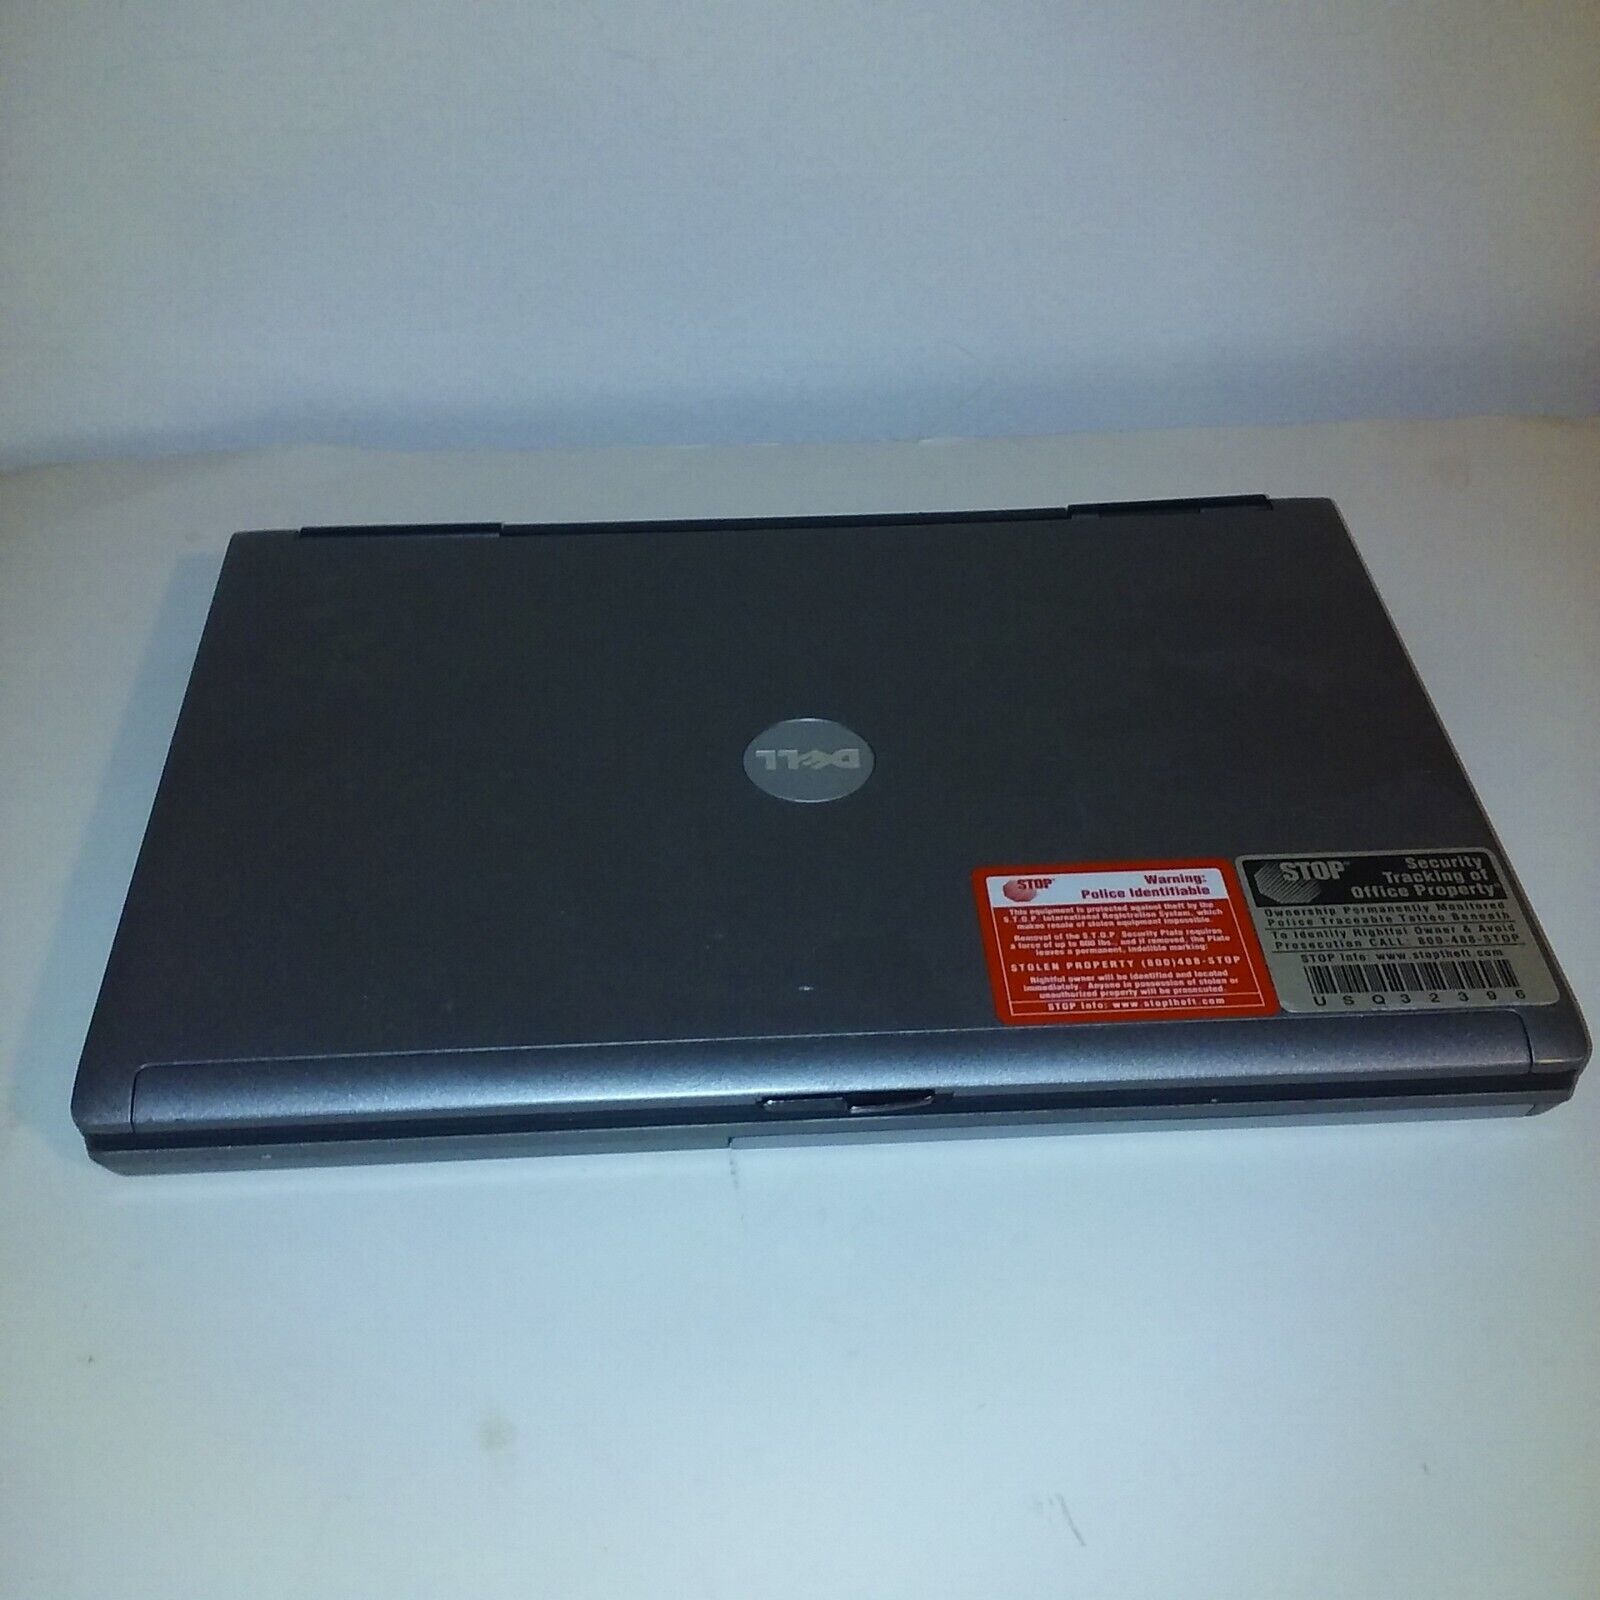 Dell Latitude D630 Windows 10 Pro 14.1" Laptop 2.0GHz 4GB 160GB  with Charger - $13.86